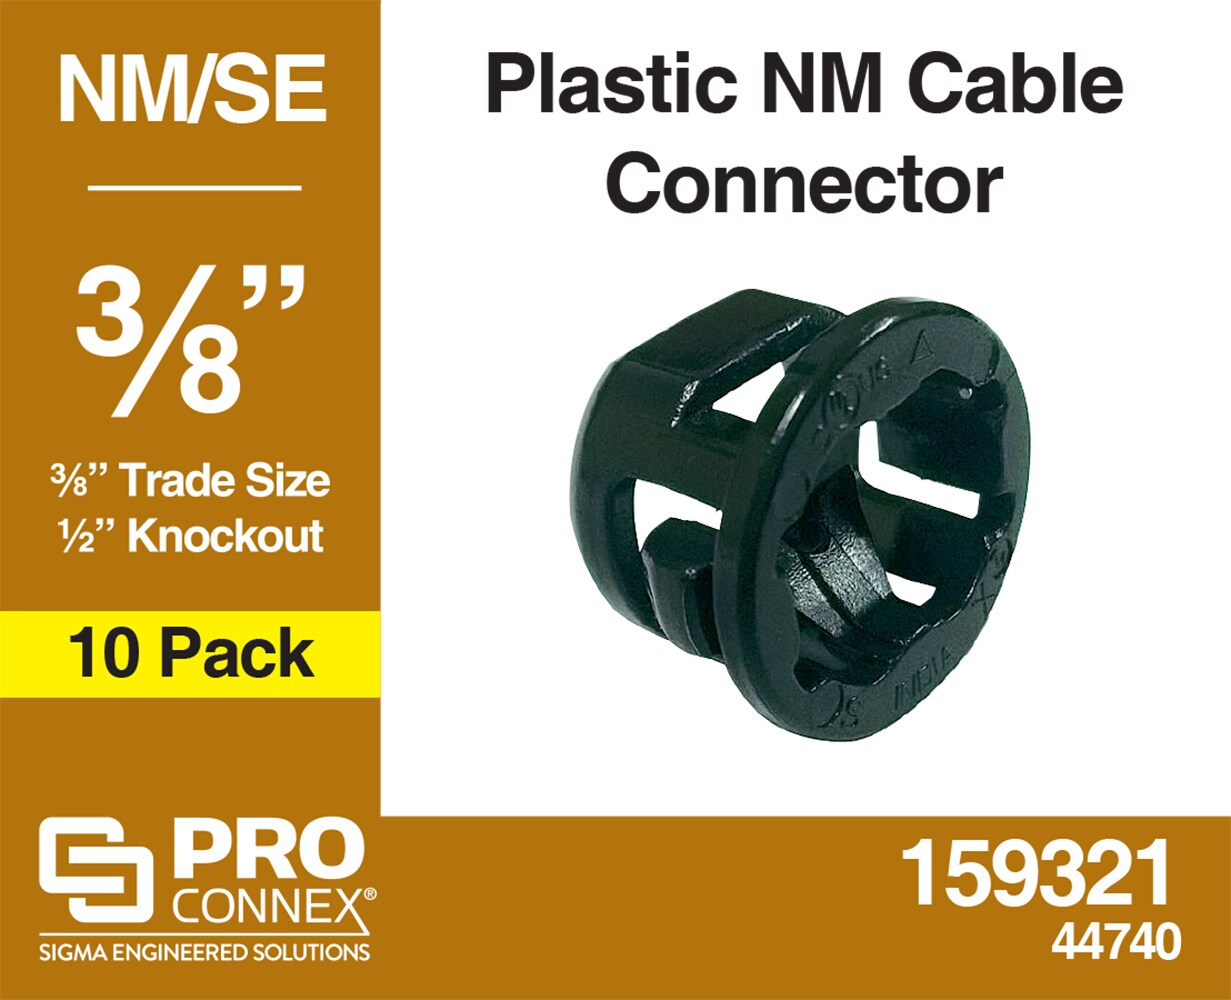 NM Cable Connector 3/8" Trade Size 1/2" Knockout NM/SE Pro Connex Qty 1 